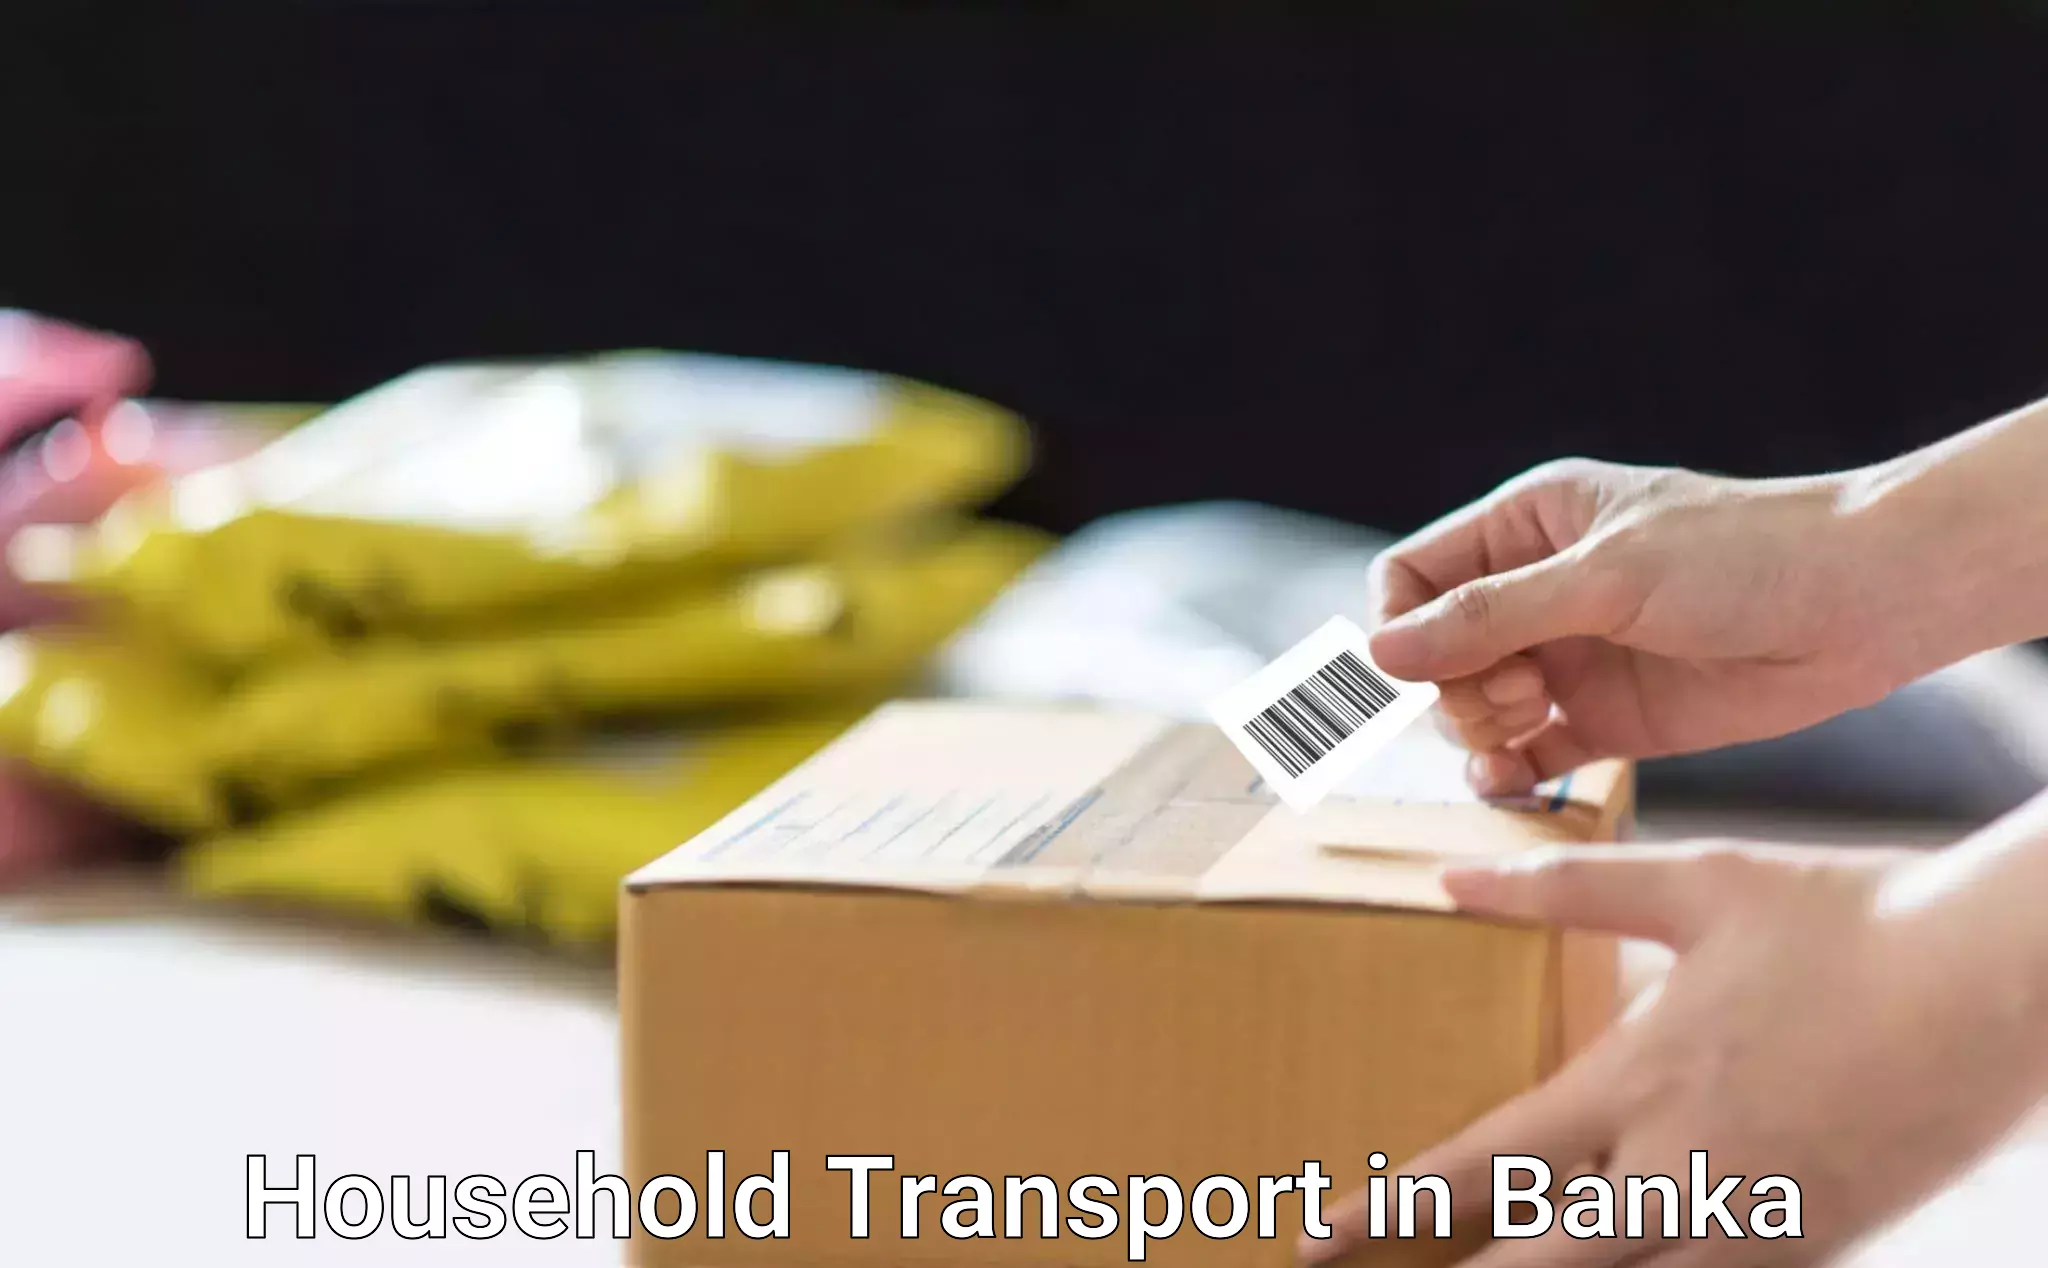 Furniture moving and handling in Banka